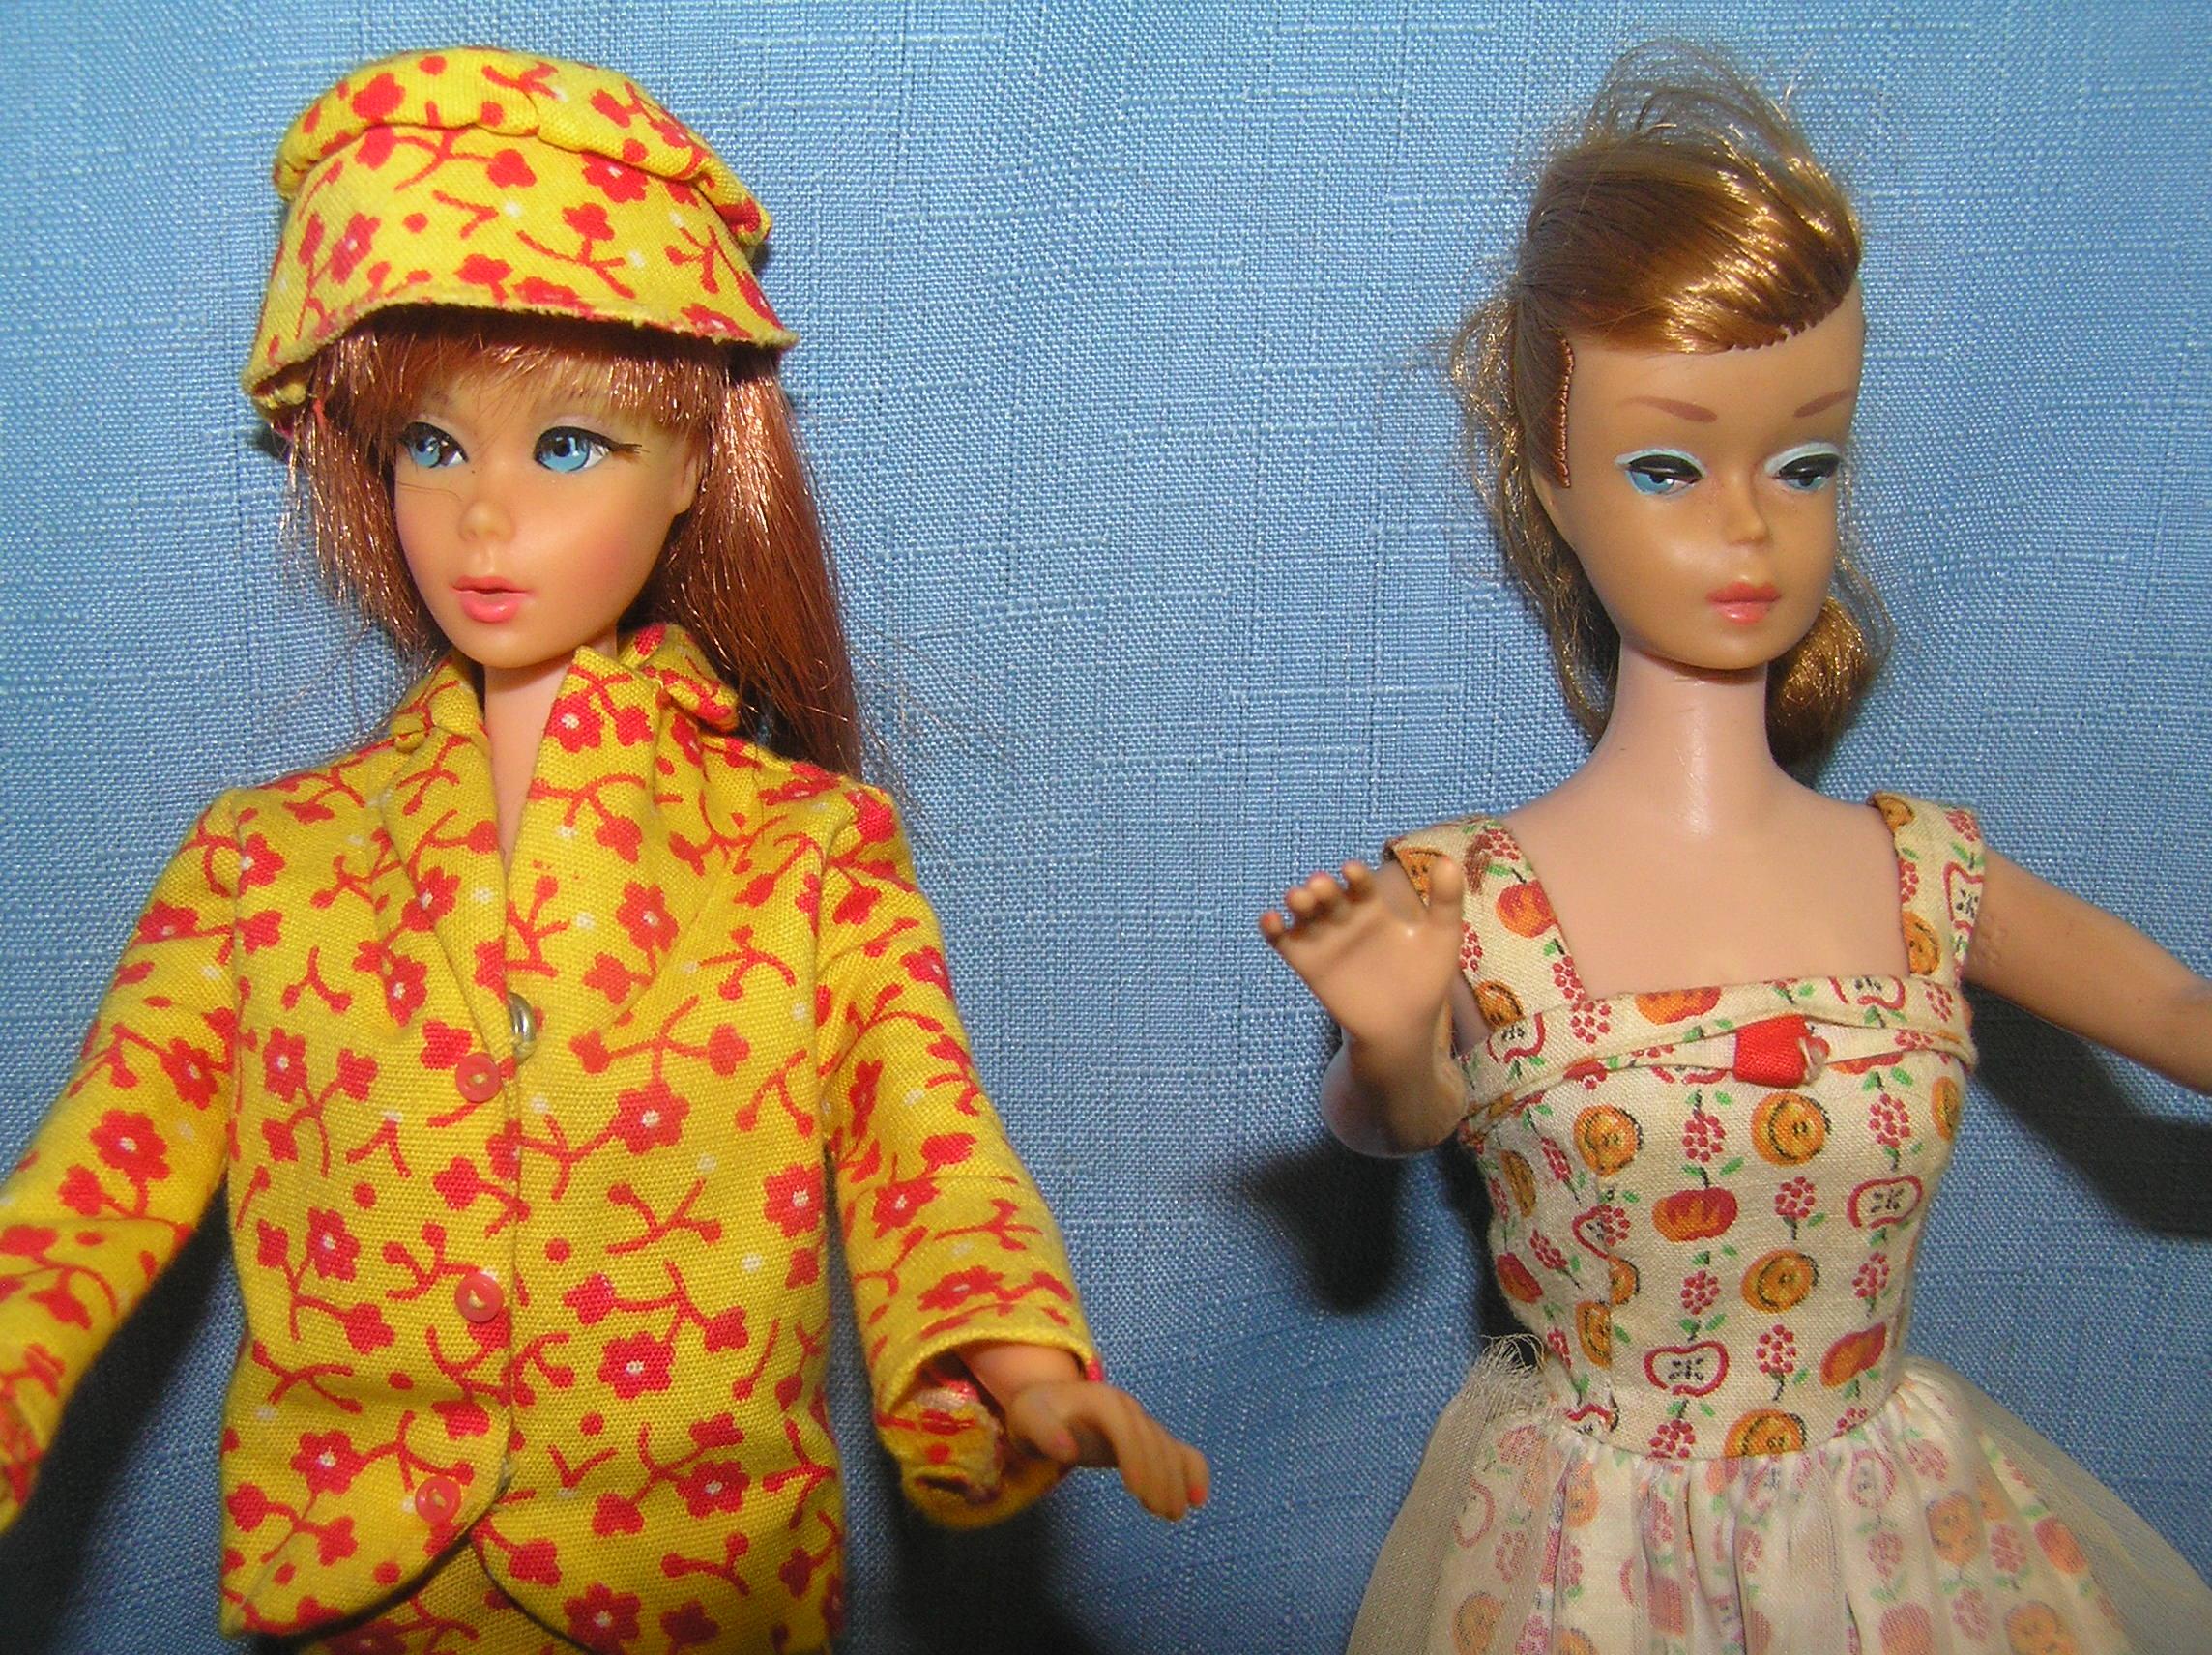 Barbie doll collection featuring 4 vintage dolls and more